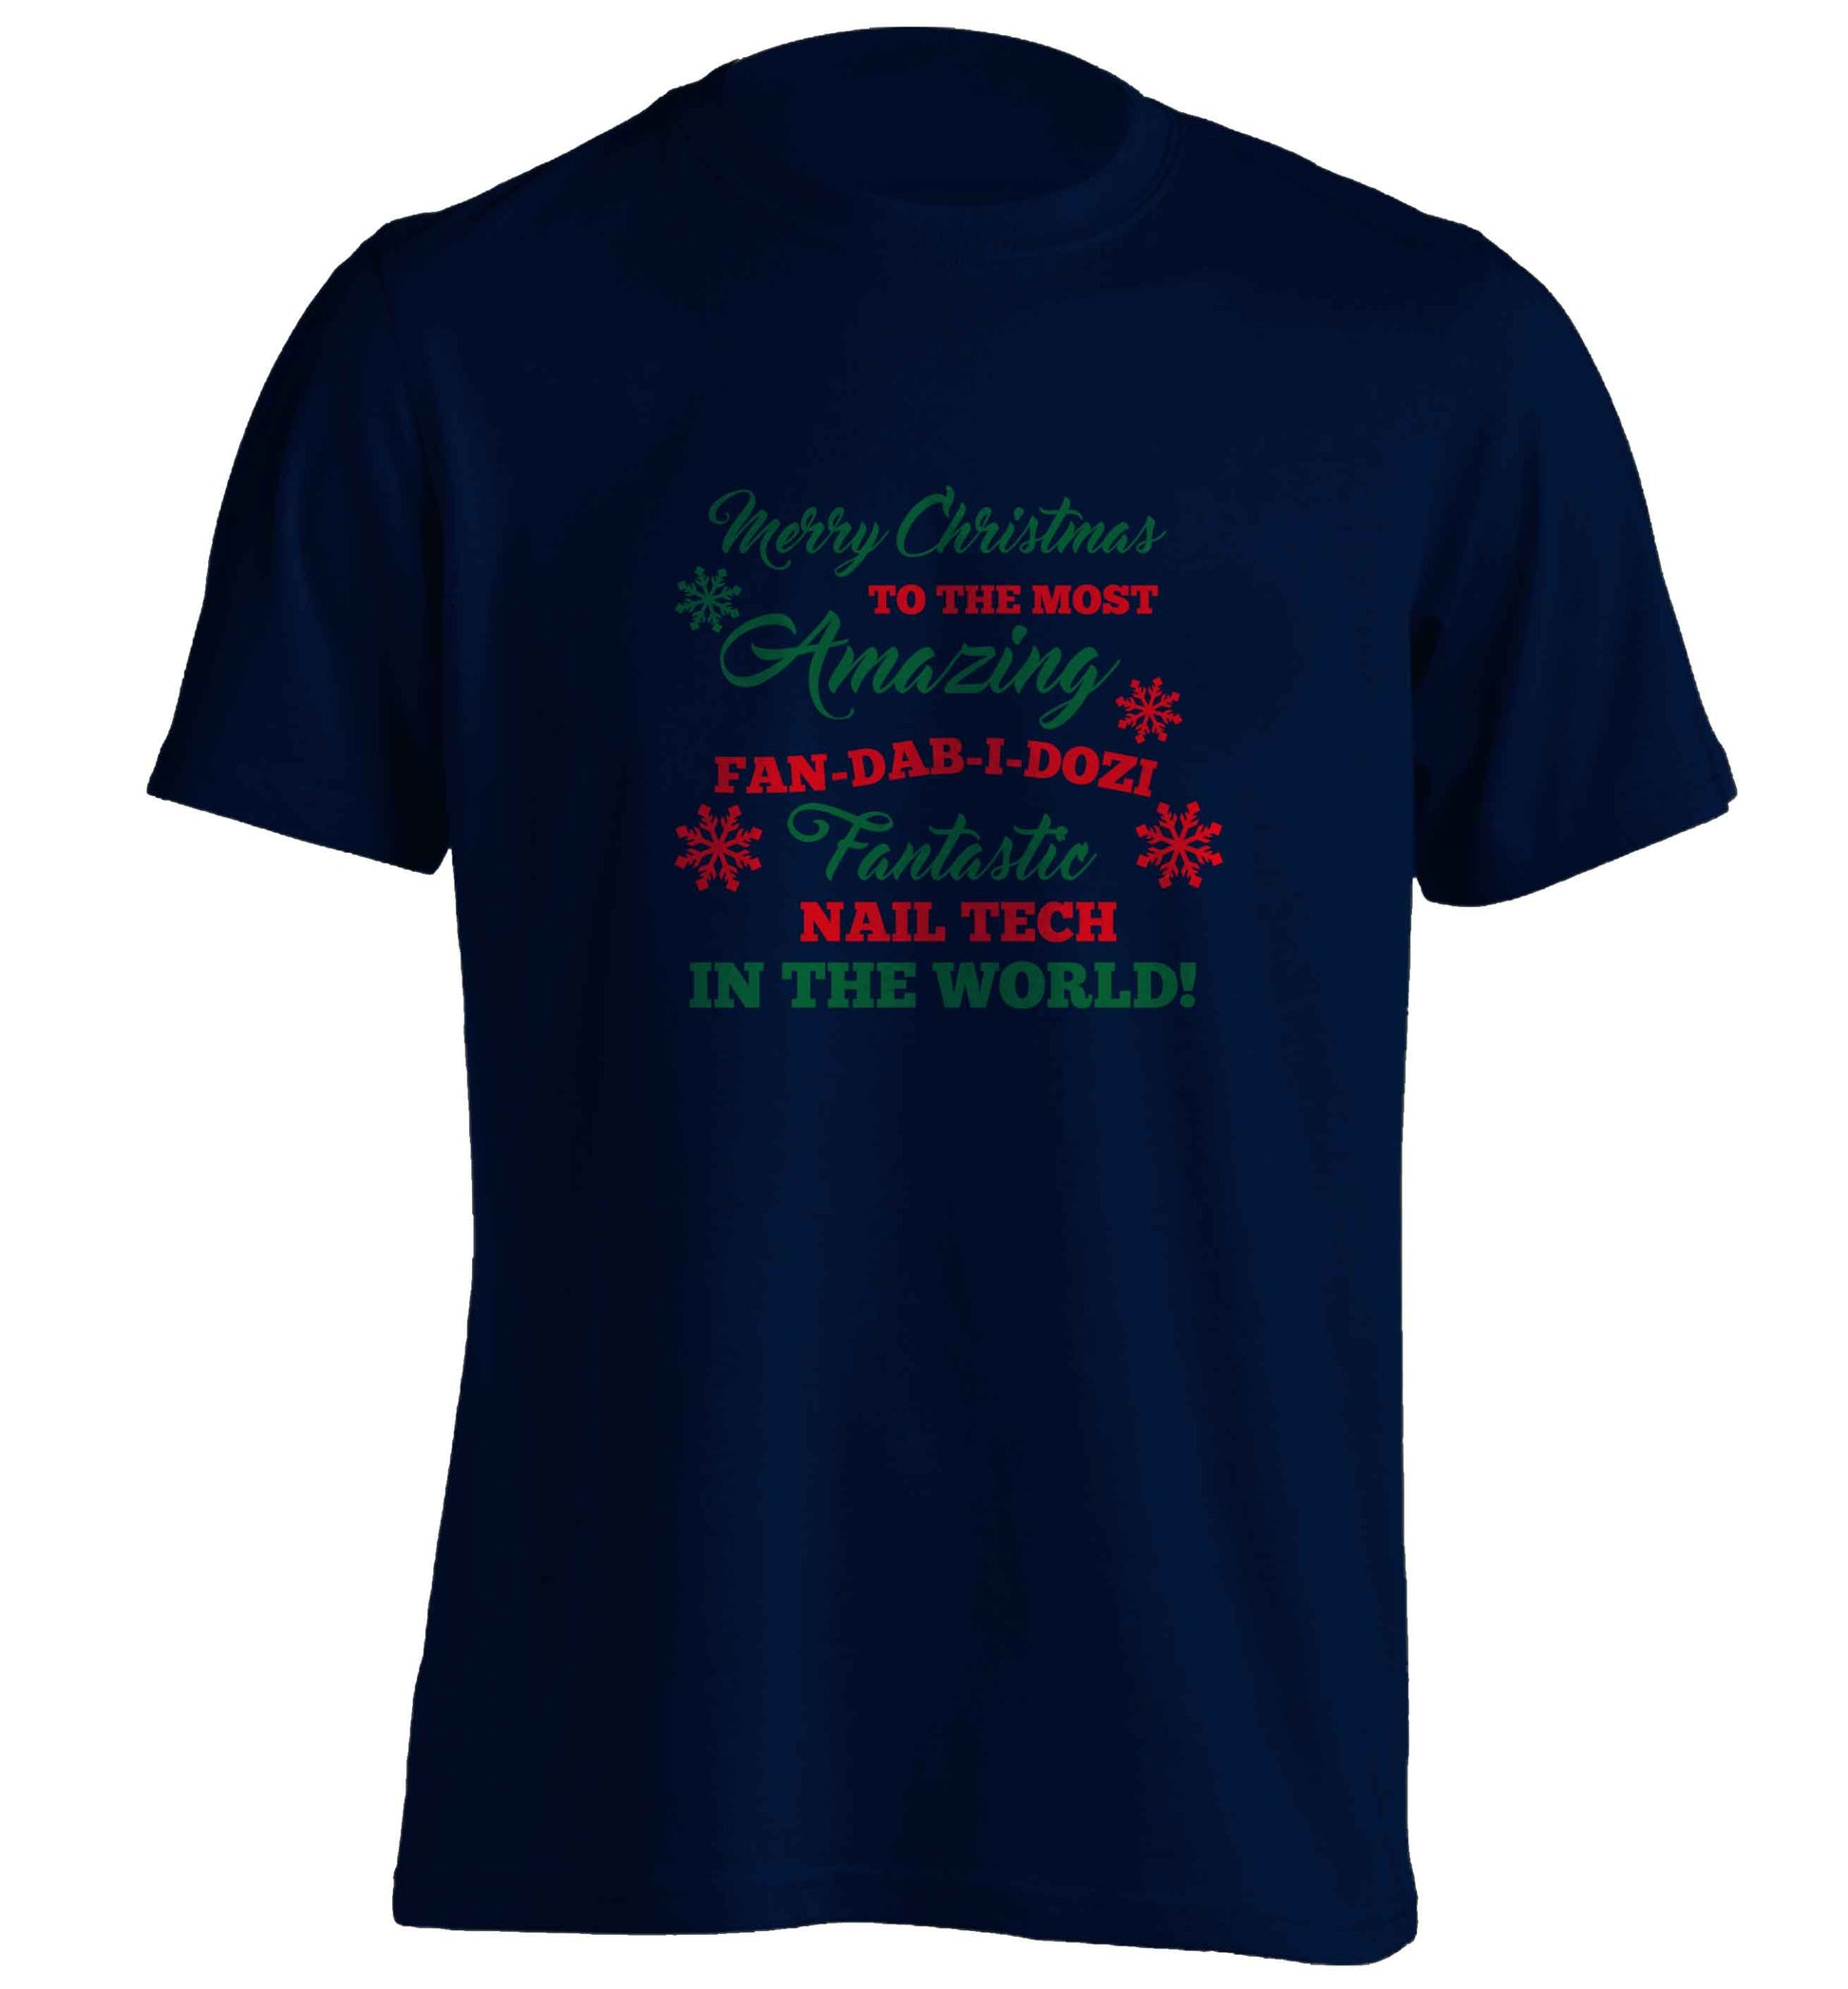 Merry Christmas to the most amazing fan-dab-i-dozi fantasic nail technician in the world adults unisex navy Tshirt 2XL